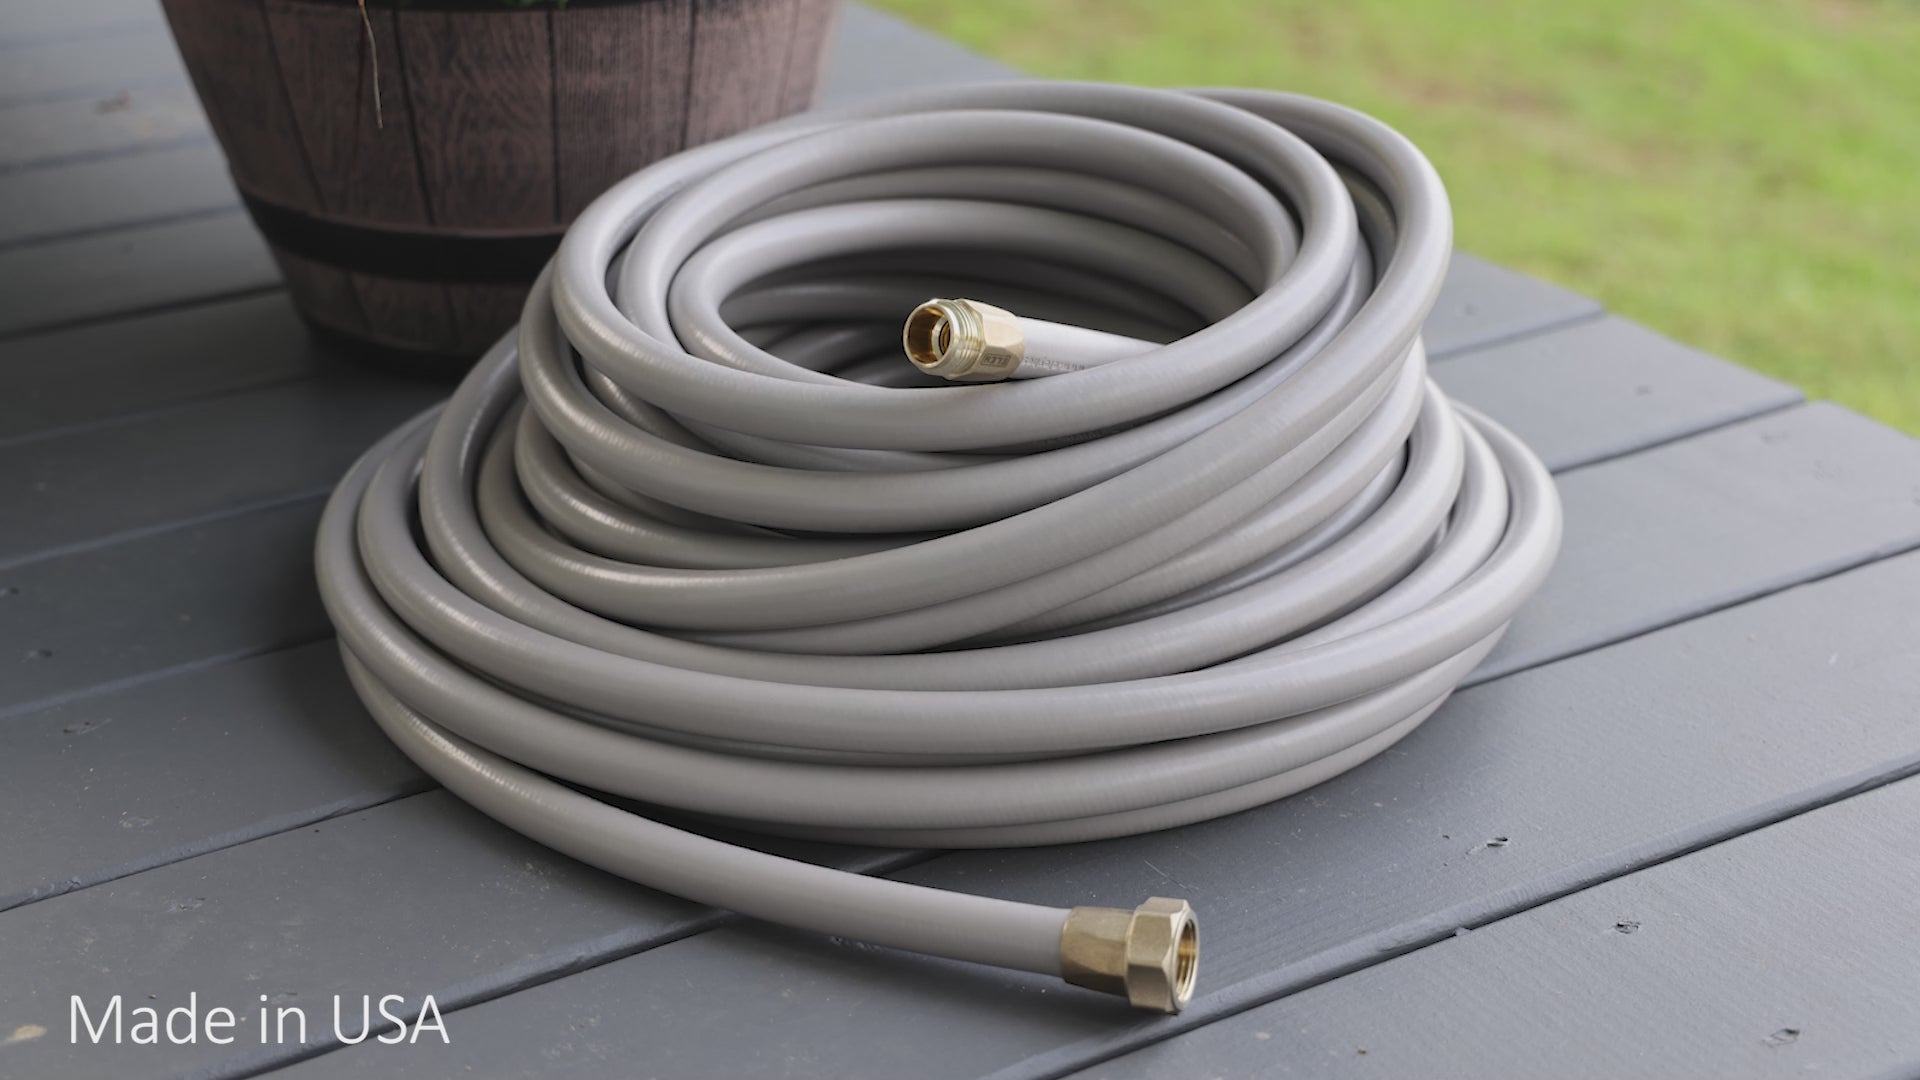 I Learned Something Important About Garden Hose Quick-Connect Fittings